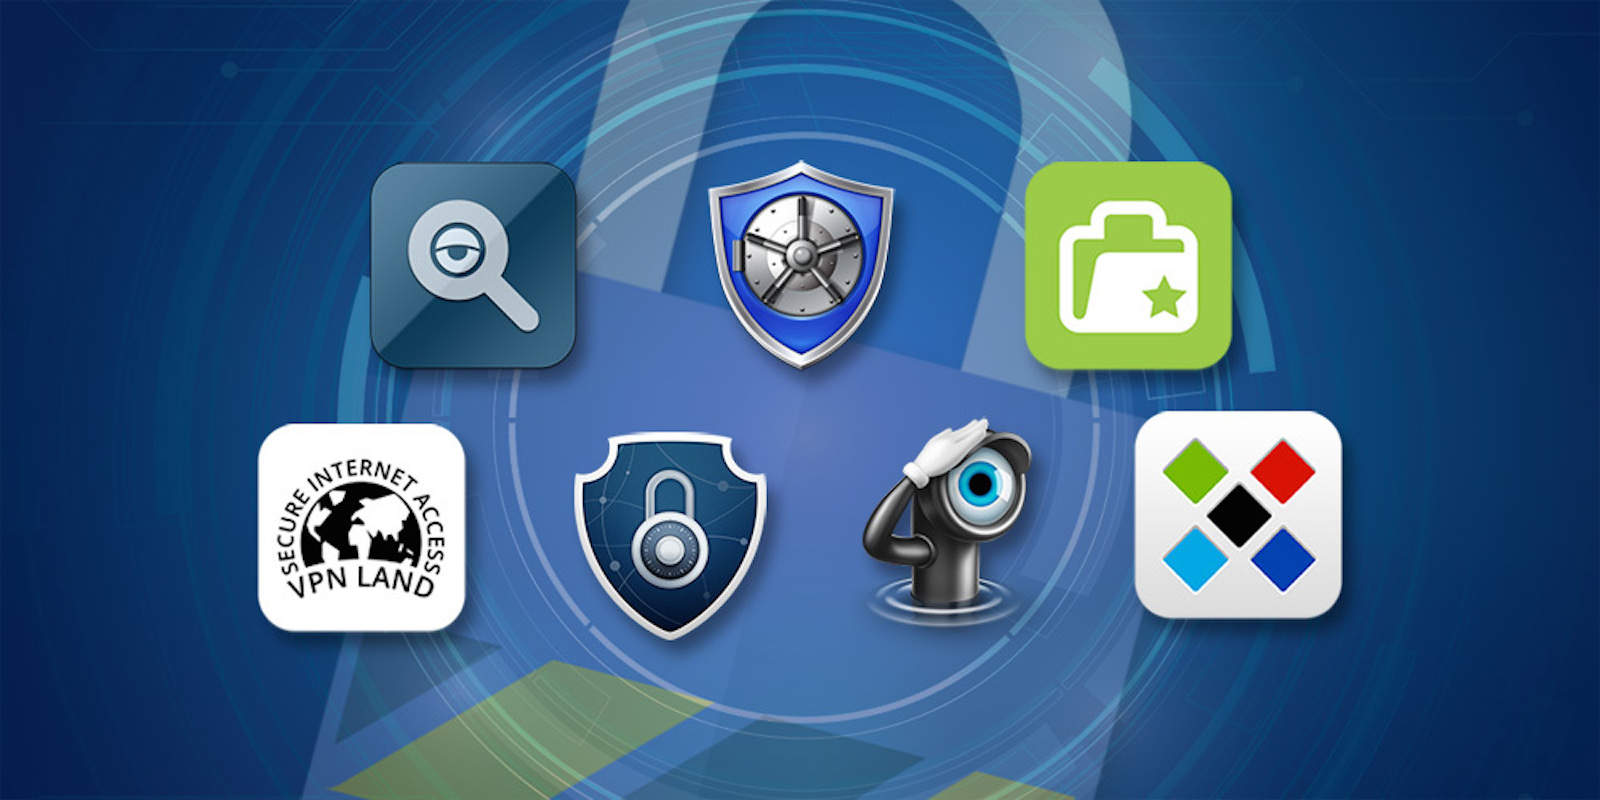 This bundle of 7 cyber security apps will bring you to Fort Knox levels of protection.